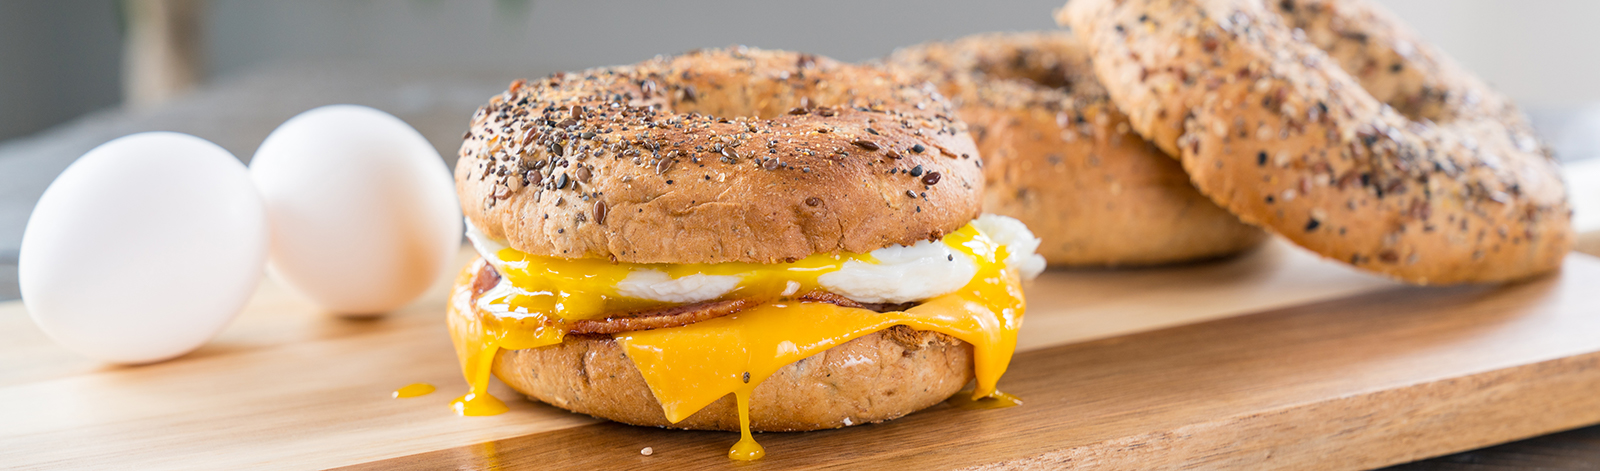 Canadian Bacon, Egg and Cheese Breakfast Sandwich